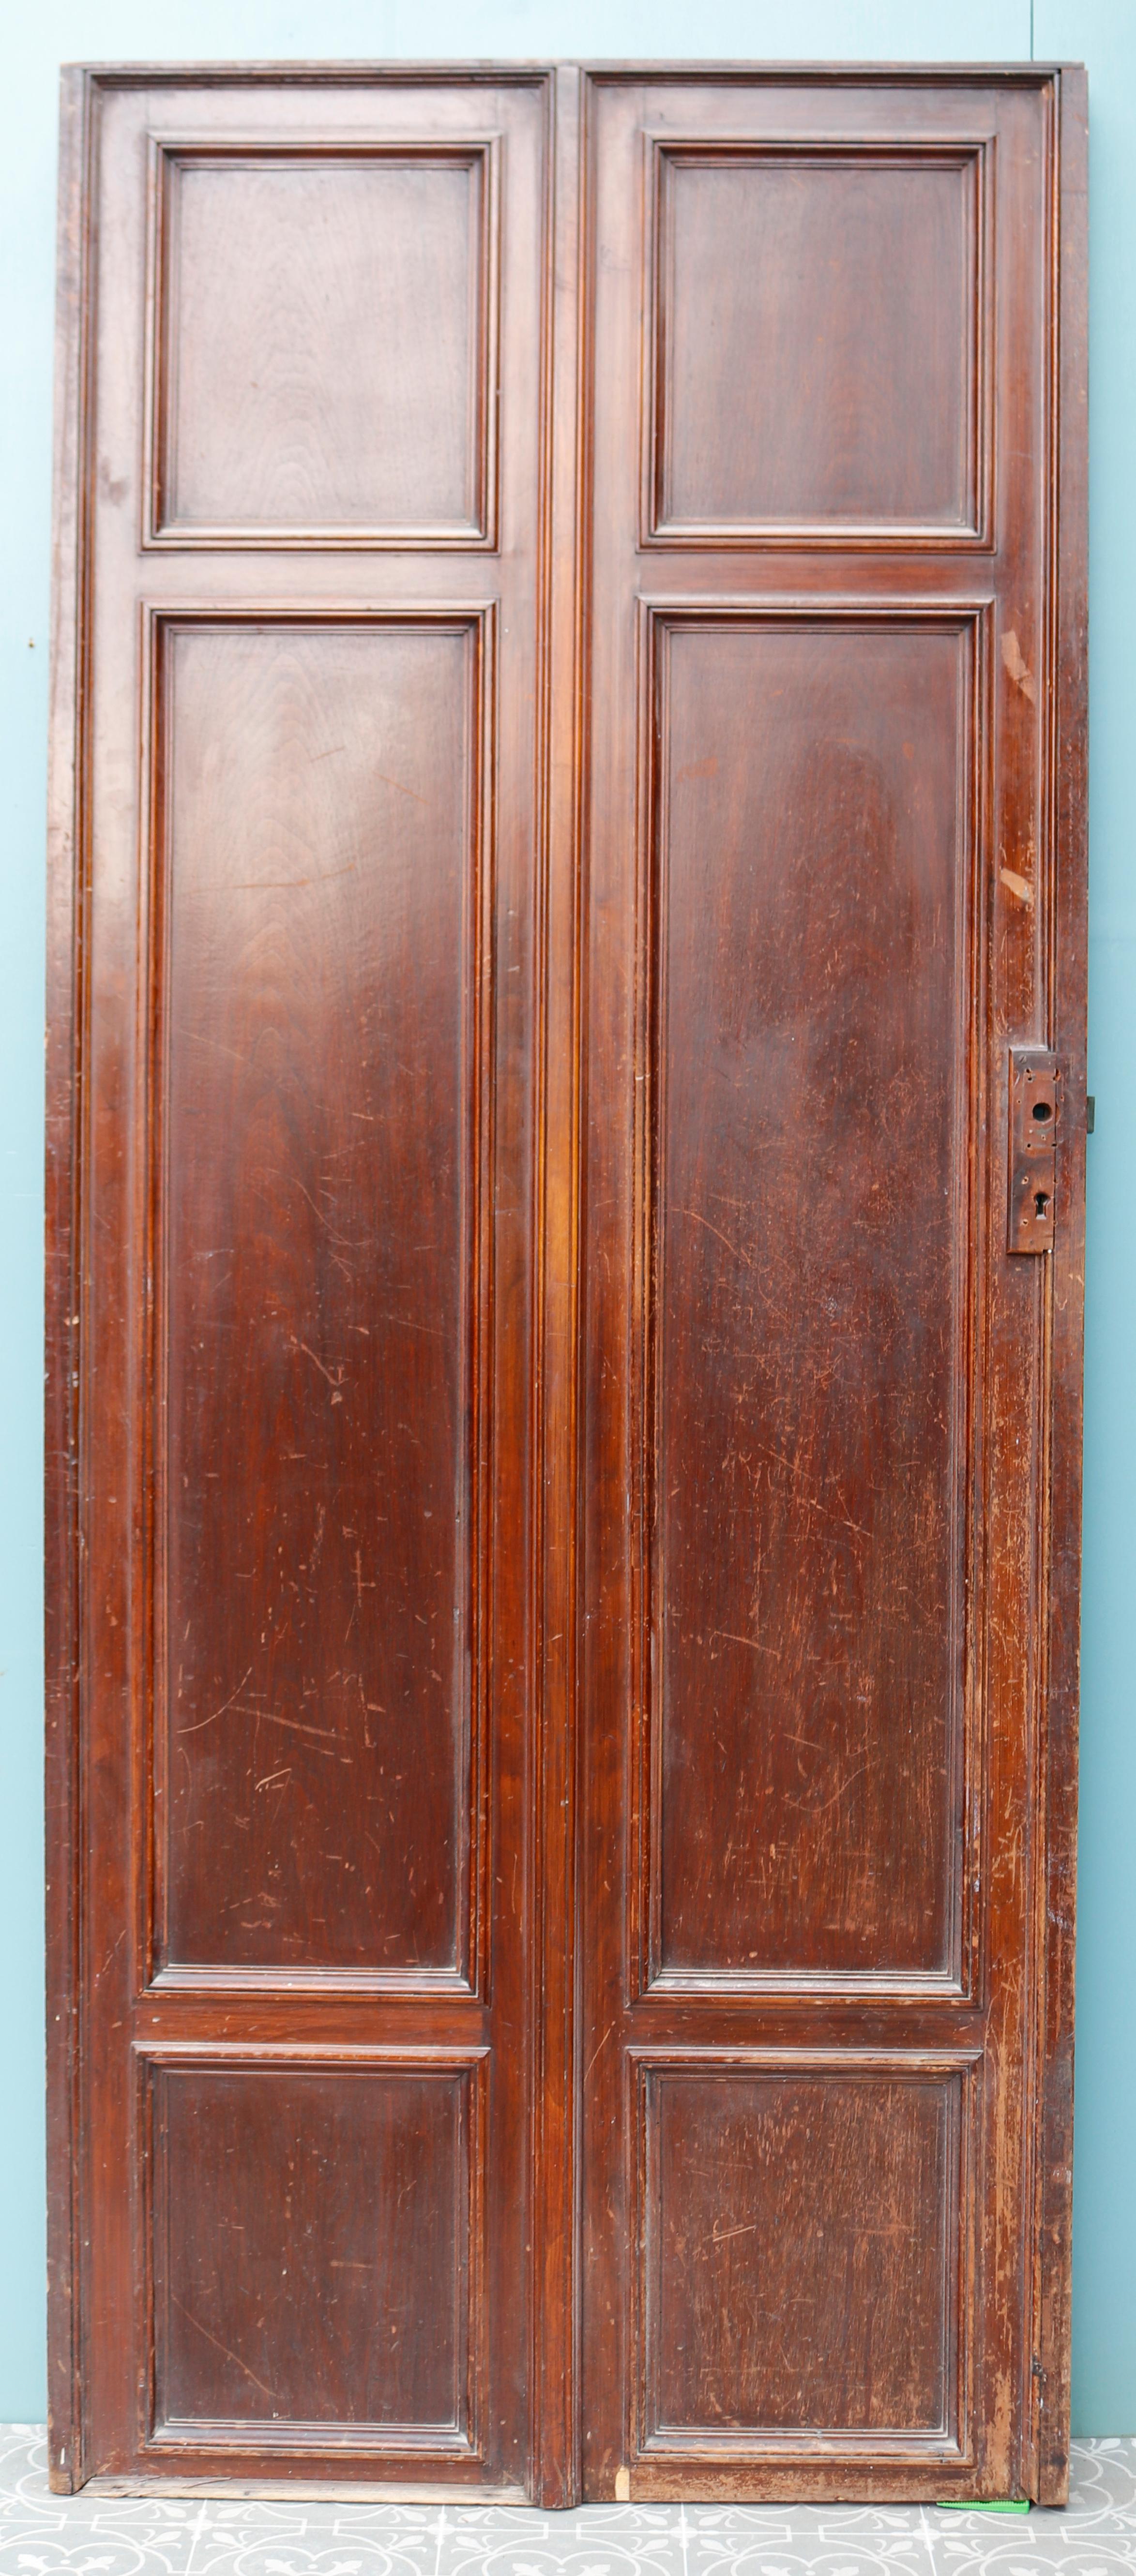 Reclaimed carved walnut door. Antique carved walnut door. This French, early 20th century door includes carved leaf patterns in a grand design on all six panels. A very decorative interior door in Louis XVI style. If you need help choosing your